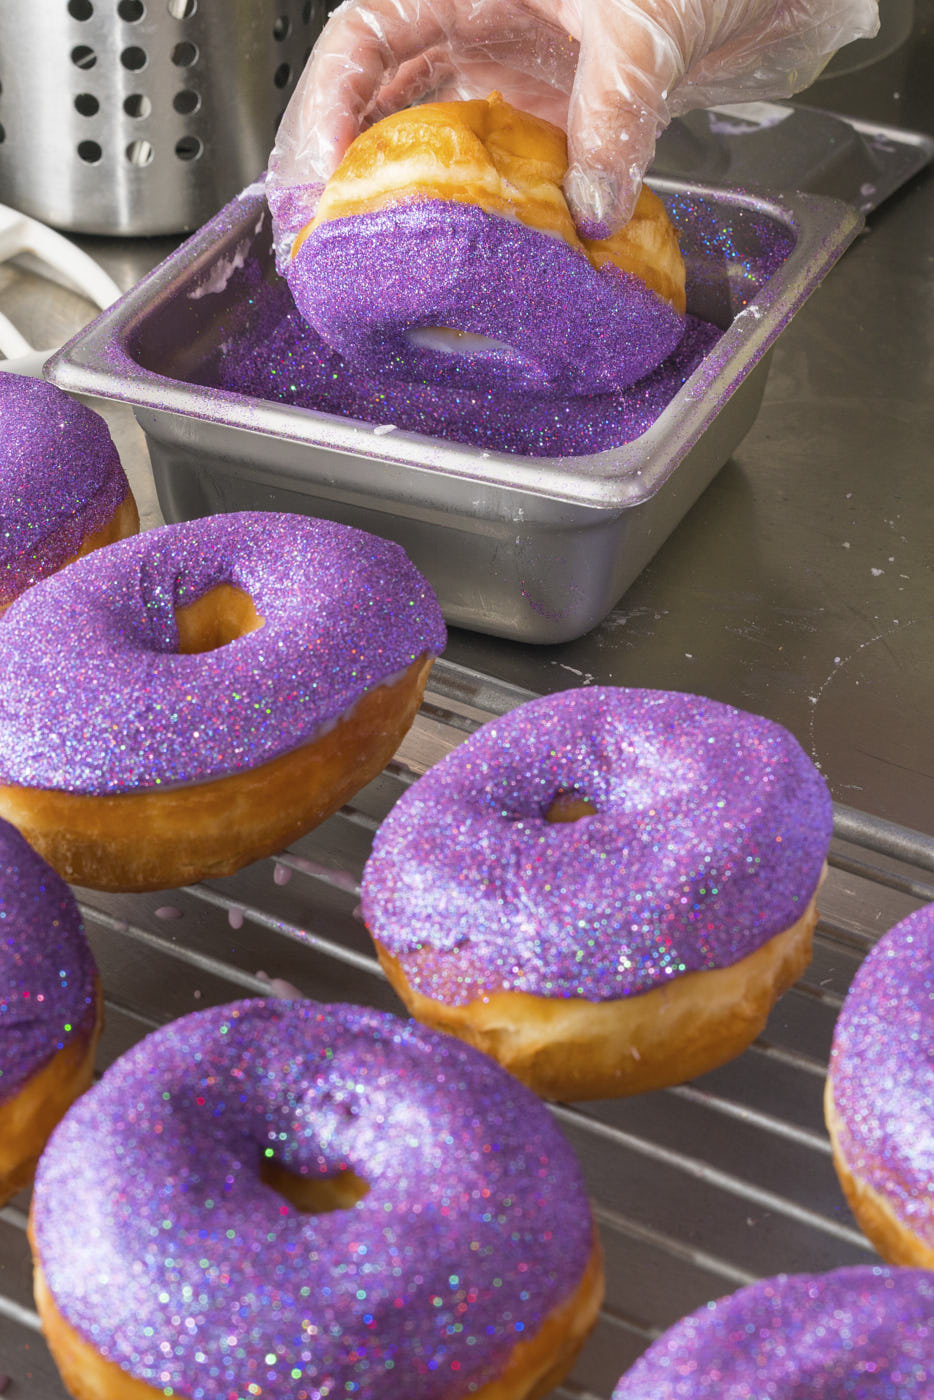 Glitter donuts being prepared at Donas